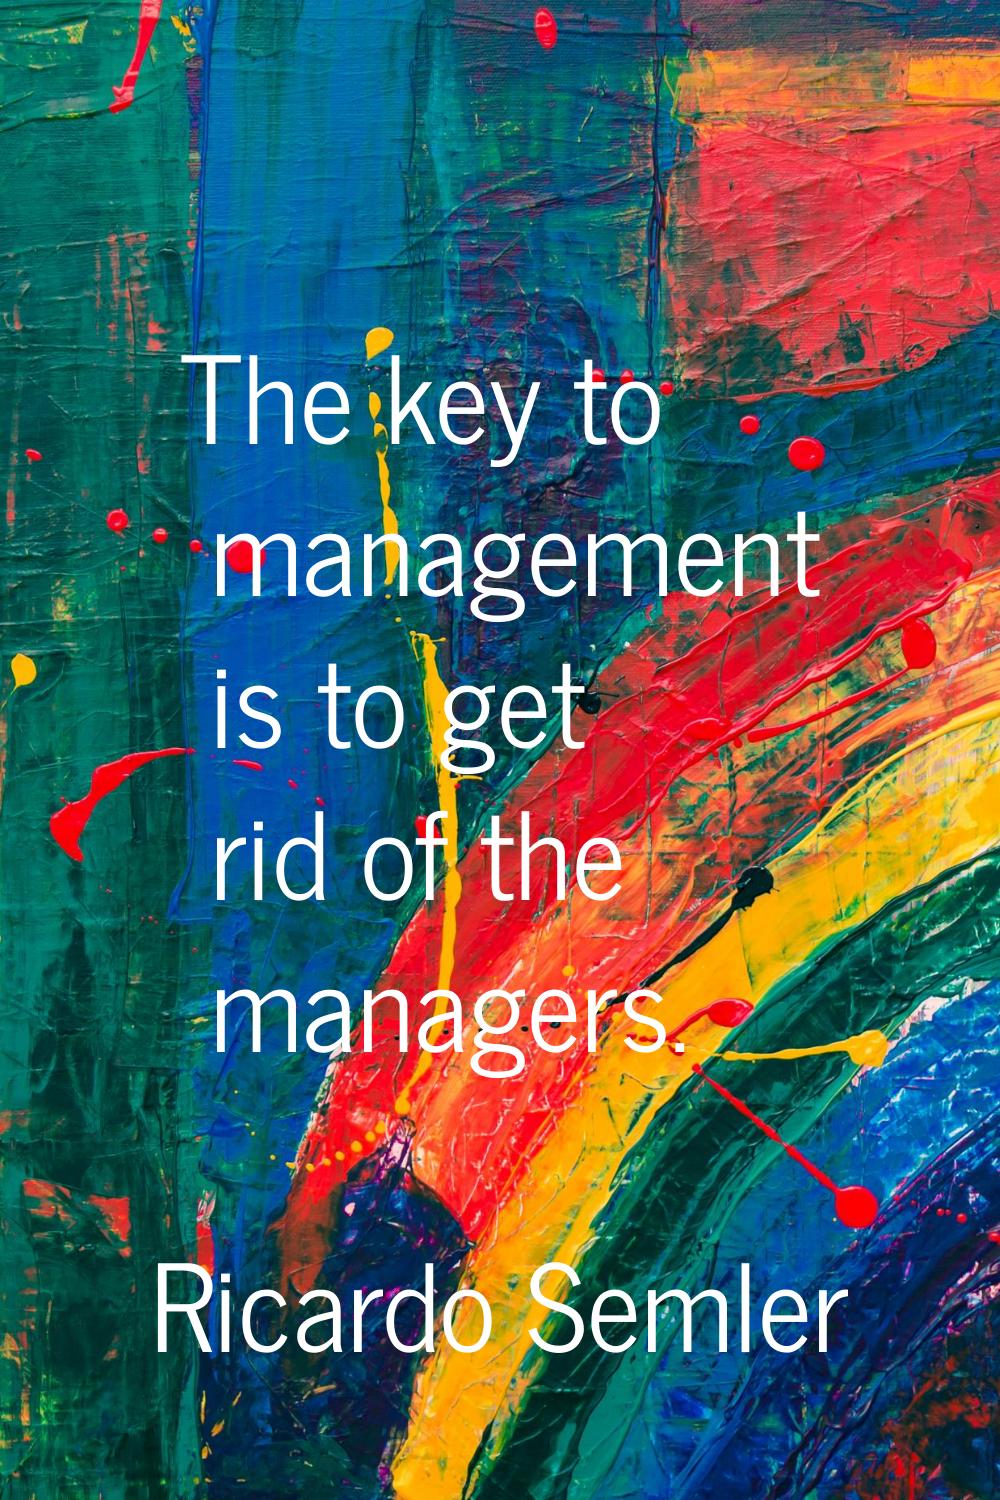 The key to management is to get rid of the managers.